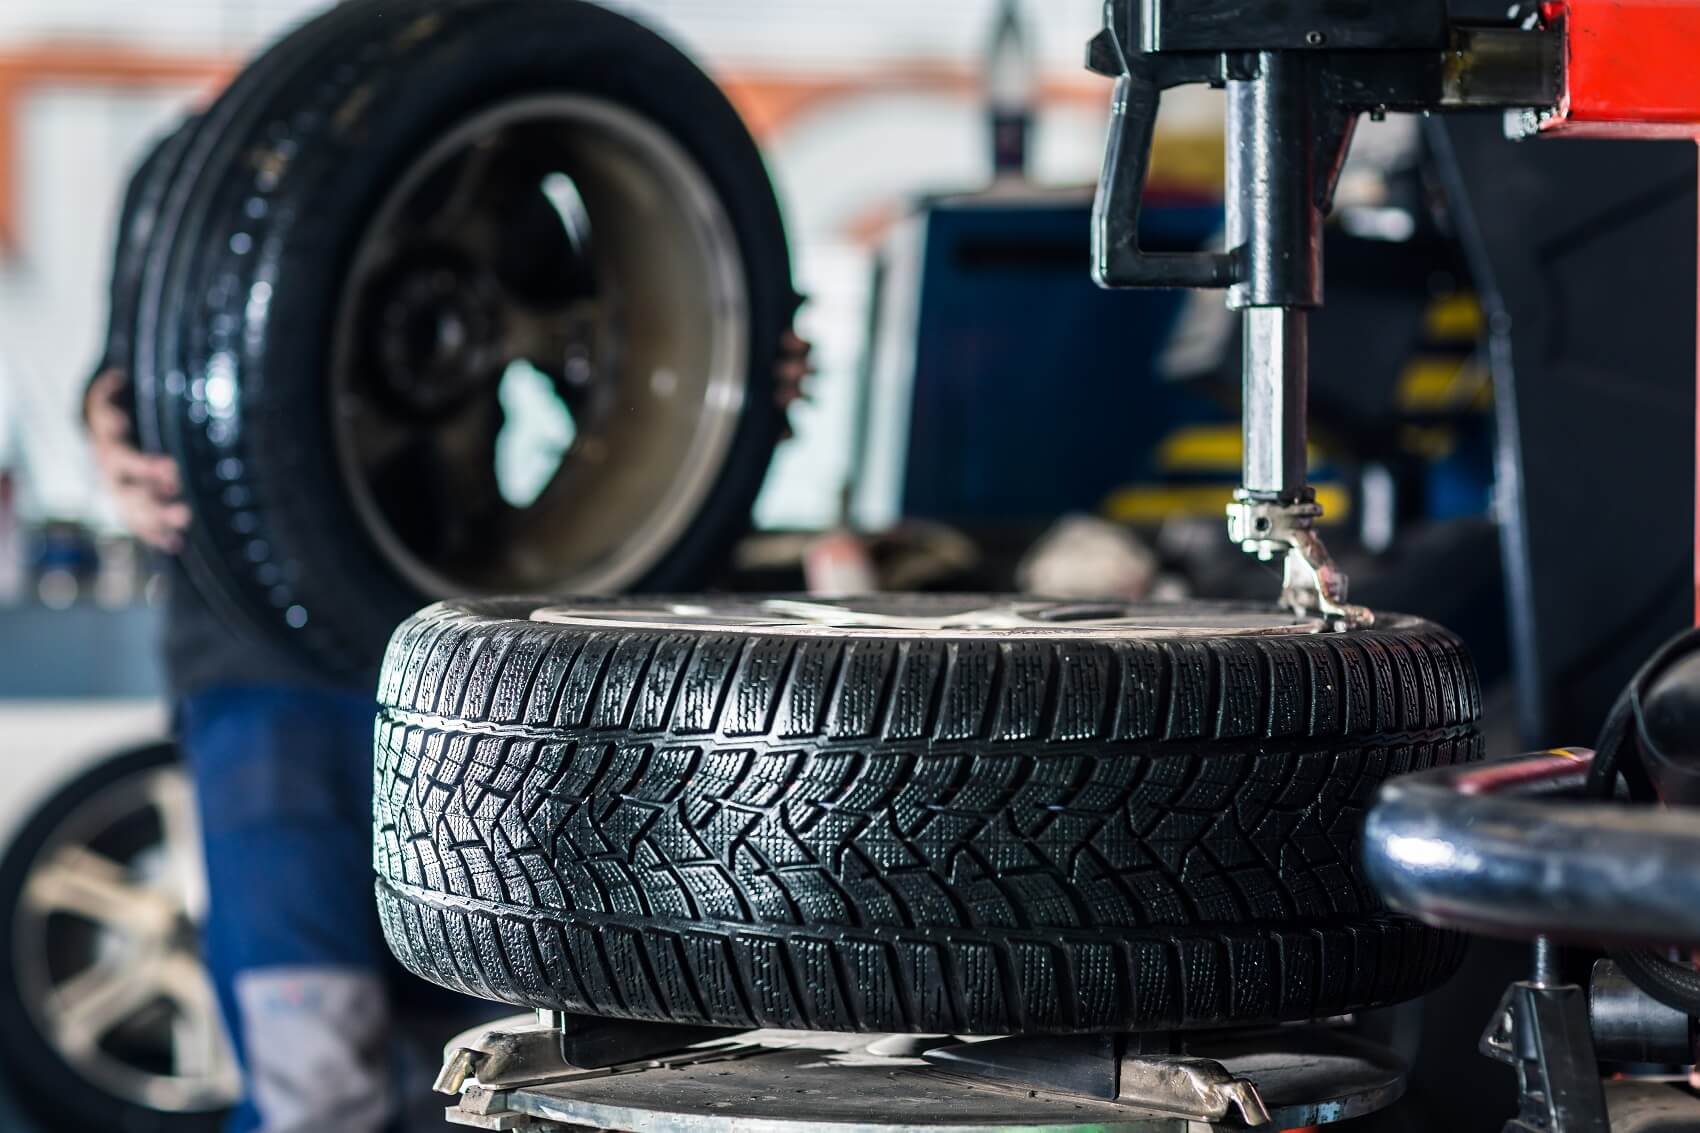 Tire Repair vs. Replacement When to Do What